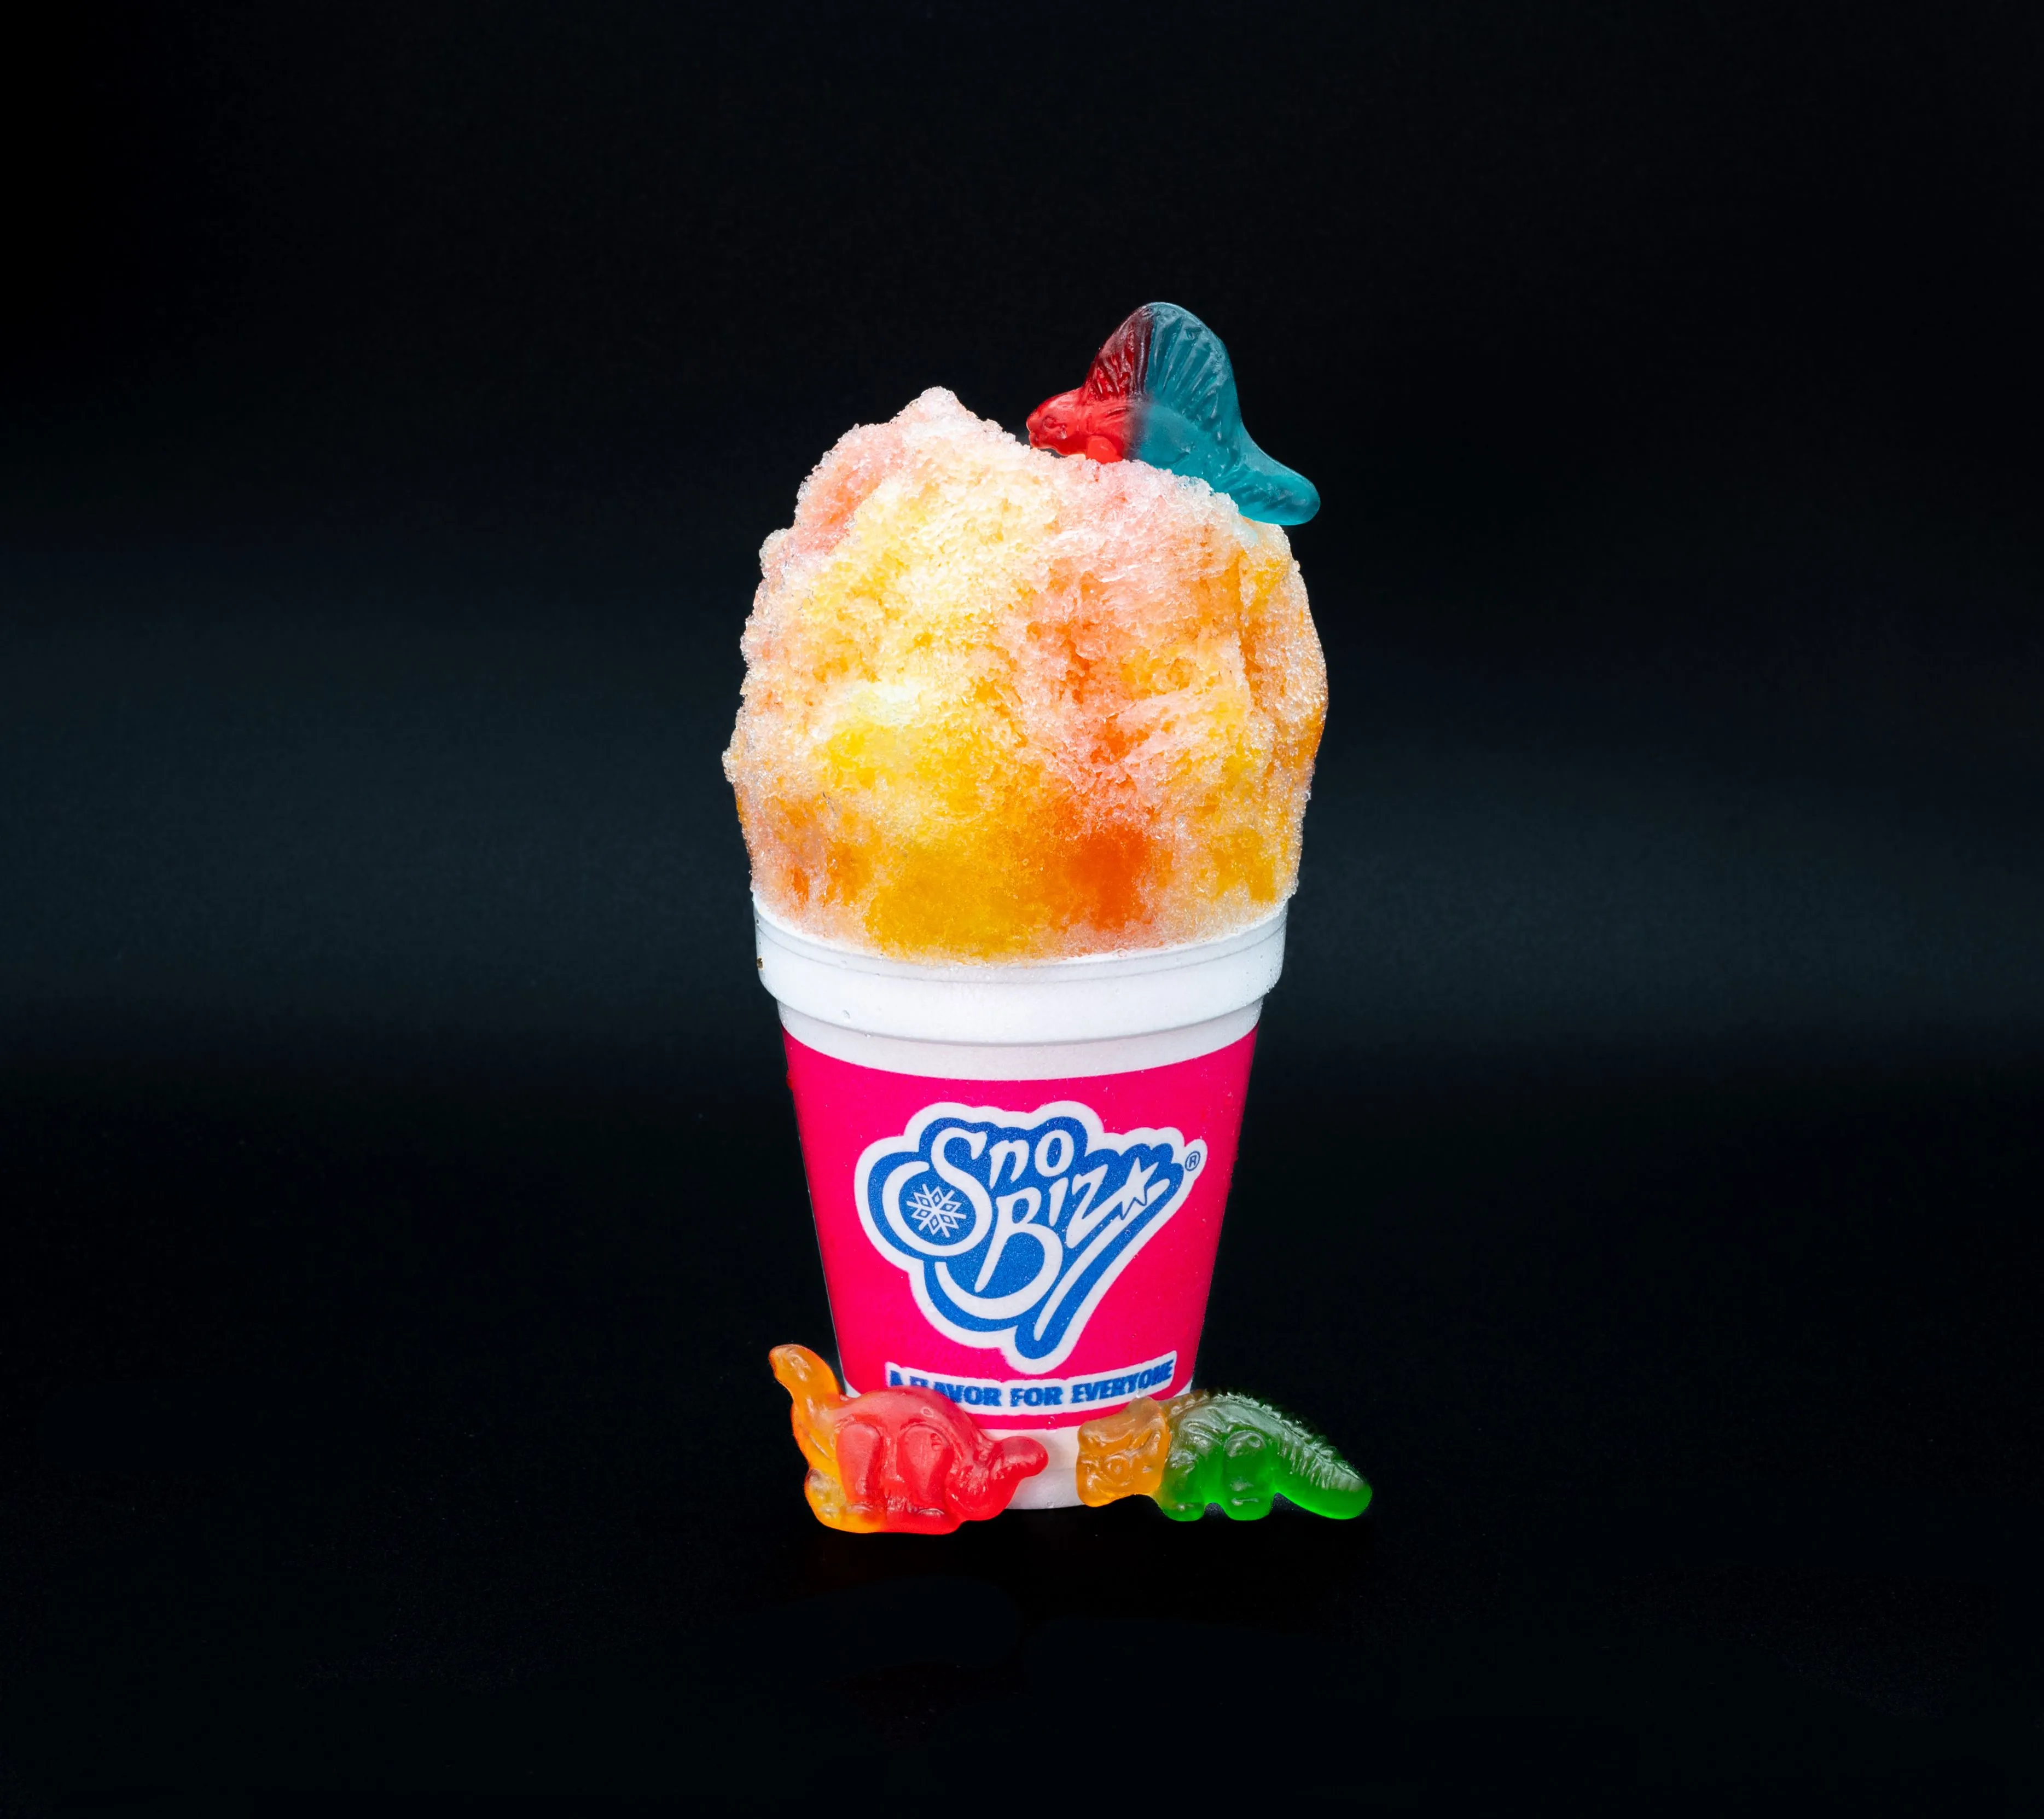 Colorful shaved ice in a branded Sno Biz cup with gummy bears on a black background.